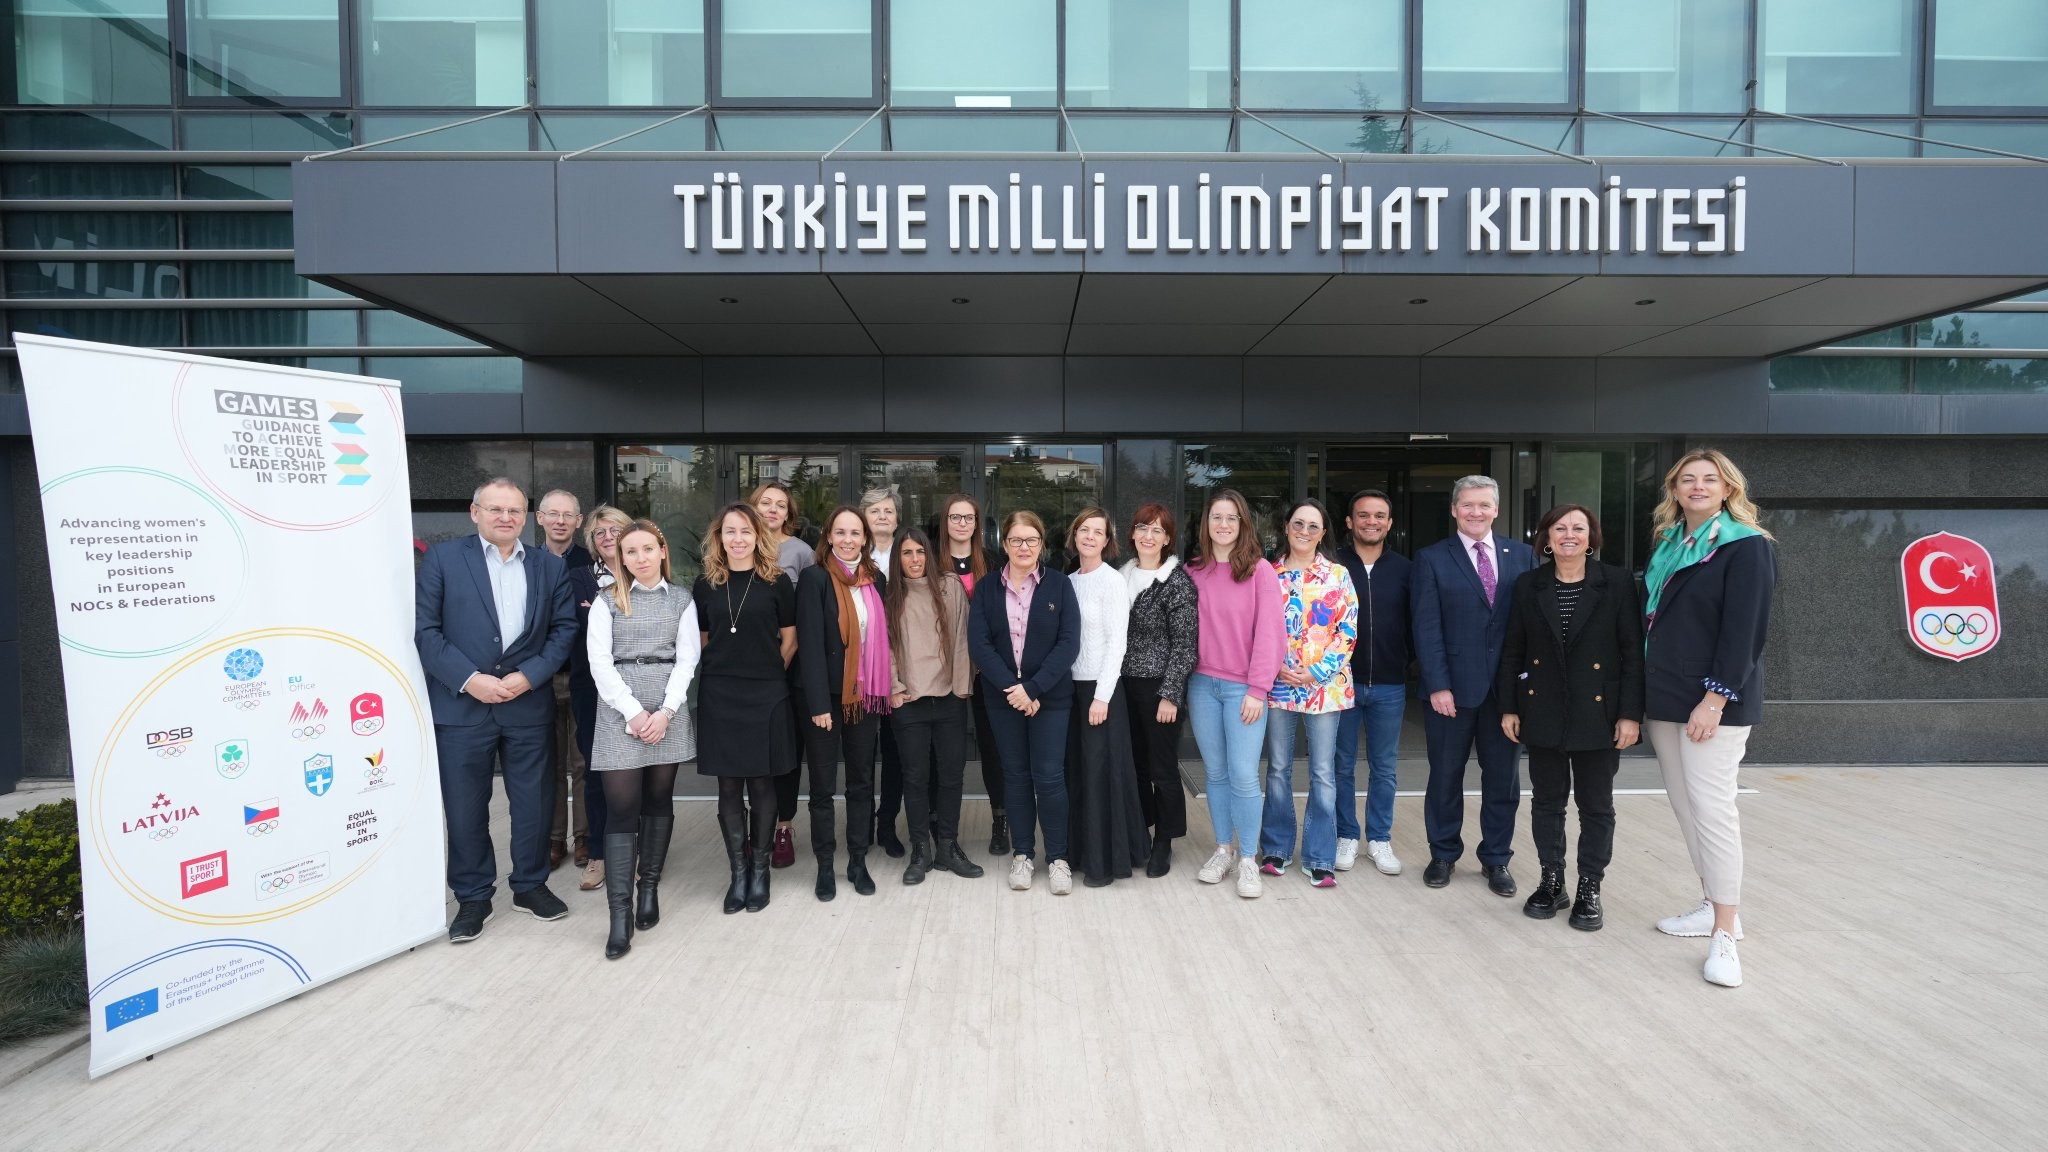 Turkish Olympic Committee hosts nations for women's sport leadership event